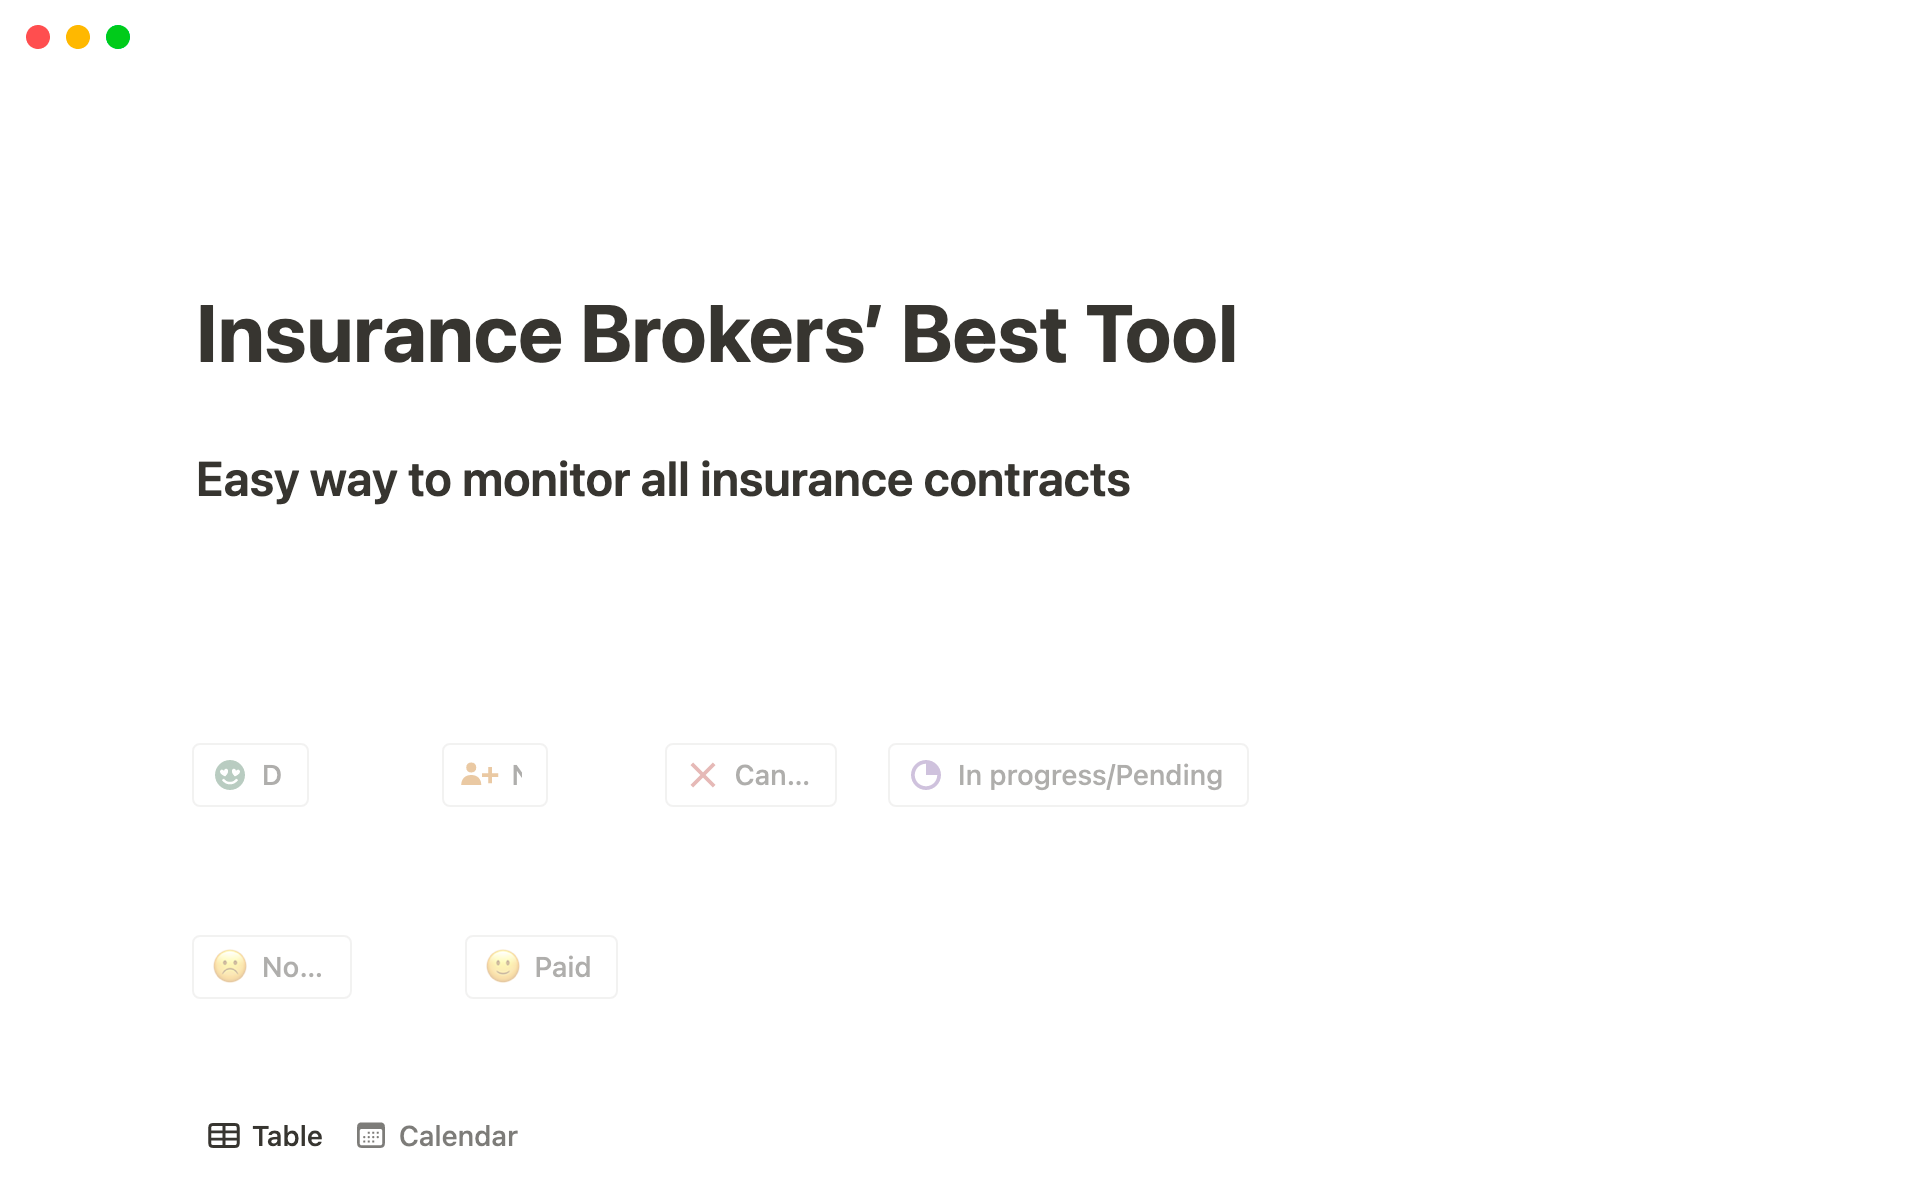 Insurance Brokers’ Best Tool / Easy way to monitor insurance contracts.  
As an Insurance Broker, you can easily import all of your insurance contracts renewals from a CSV file.
Track the status of each of your customers (new, done, in progress, pending, canceled)